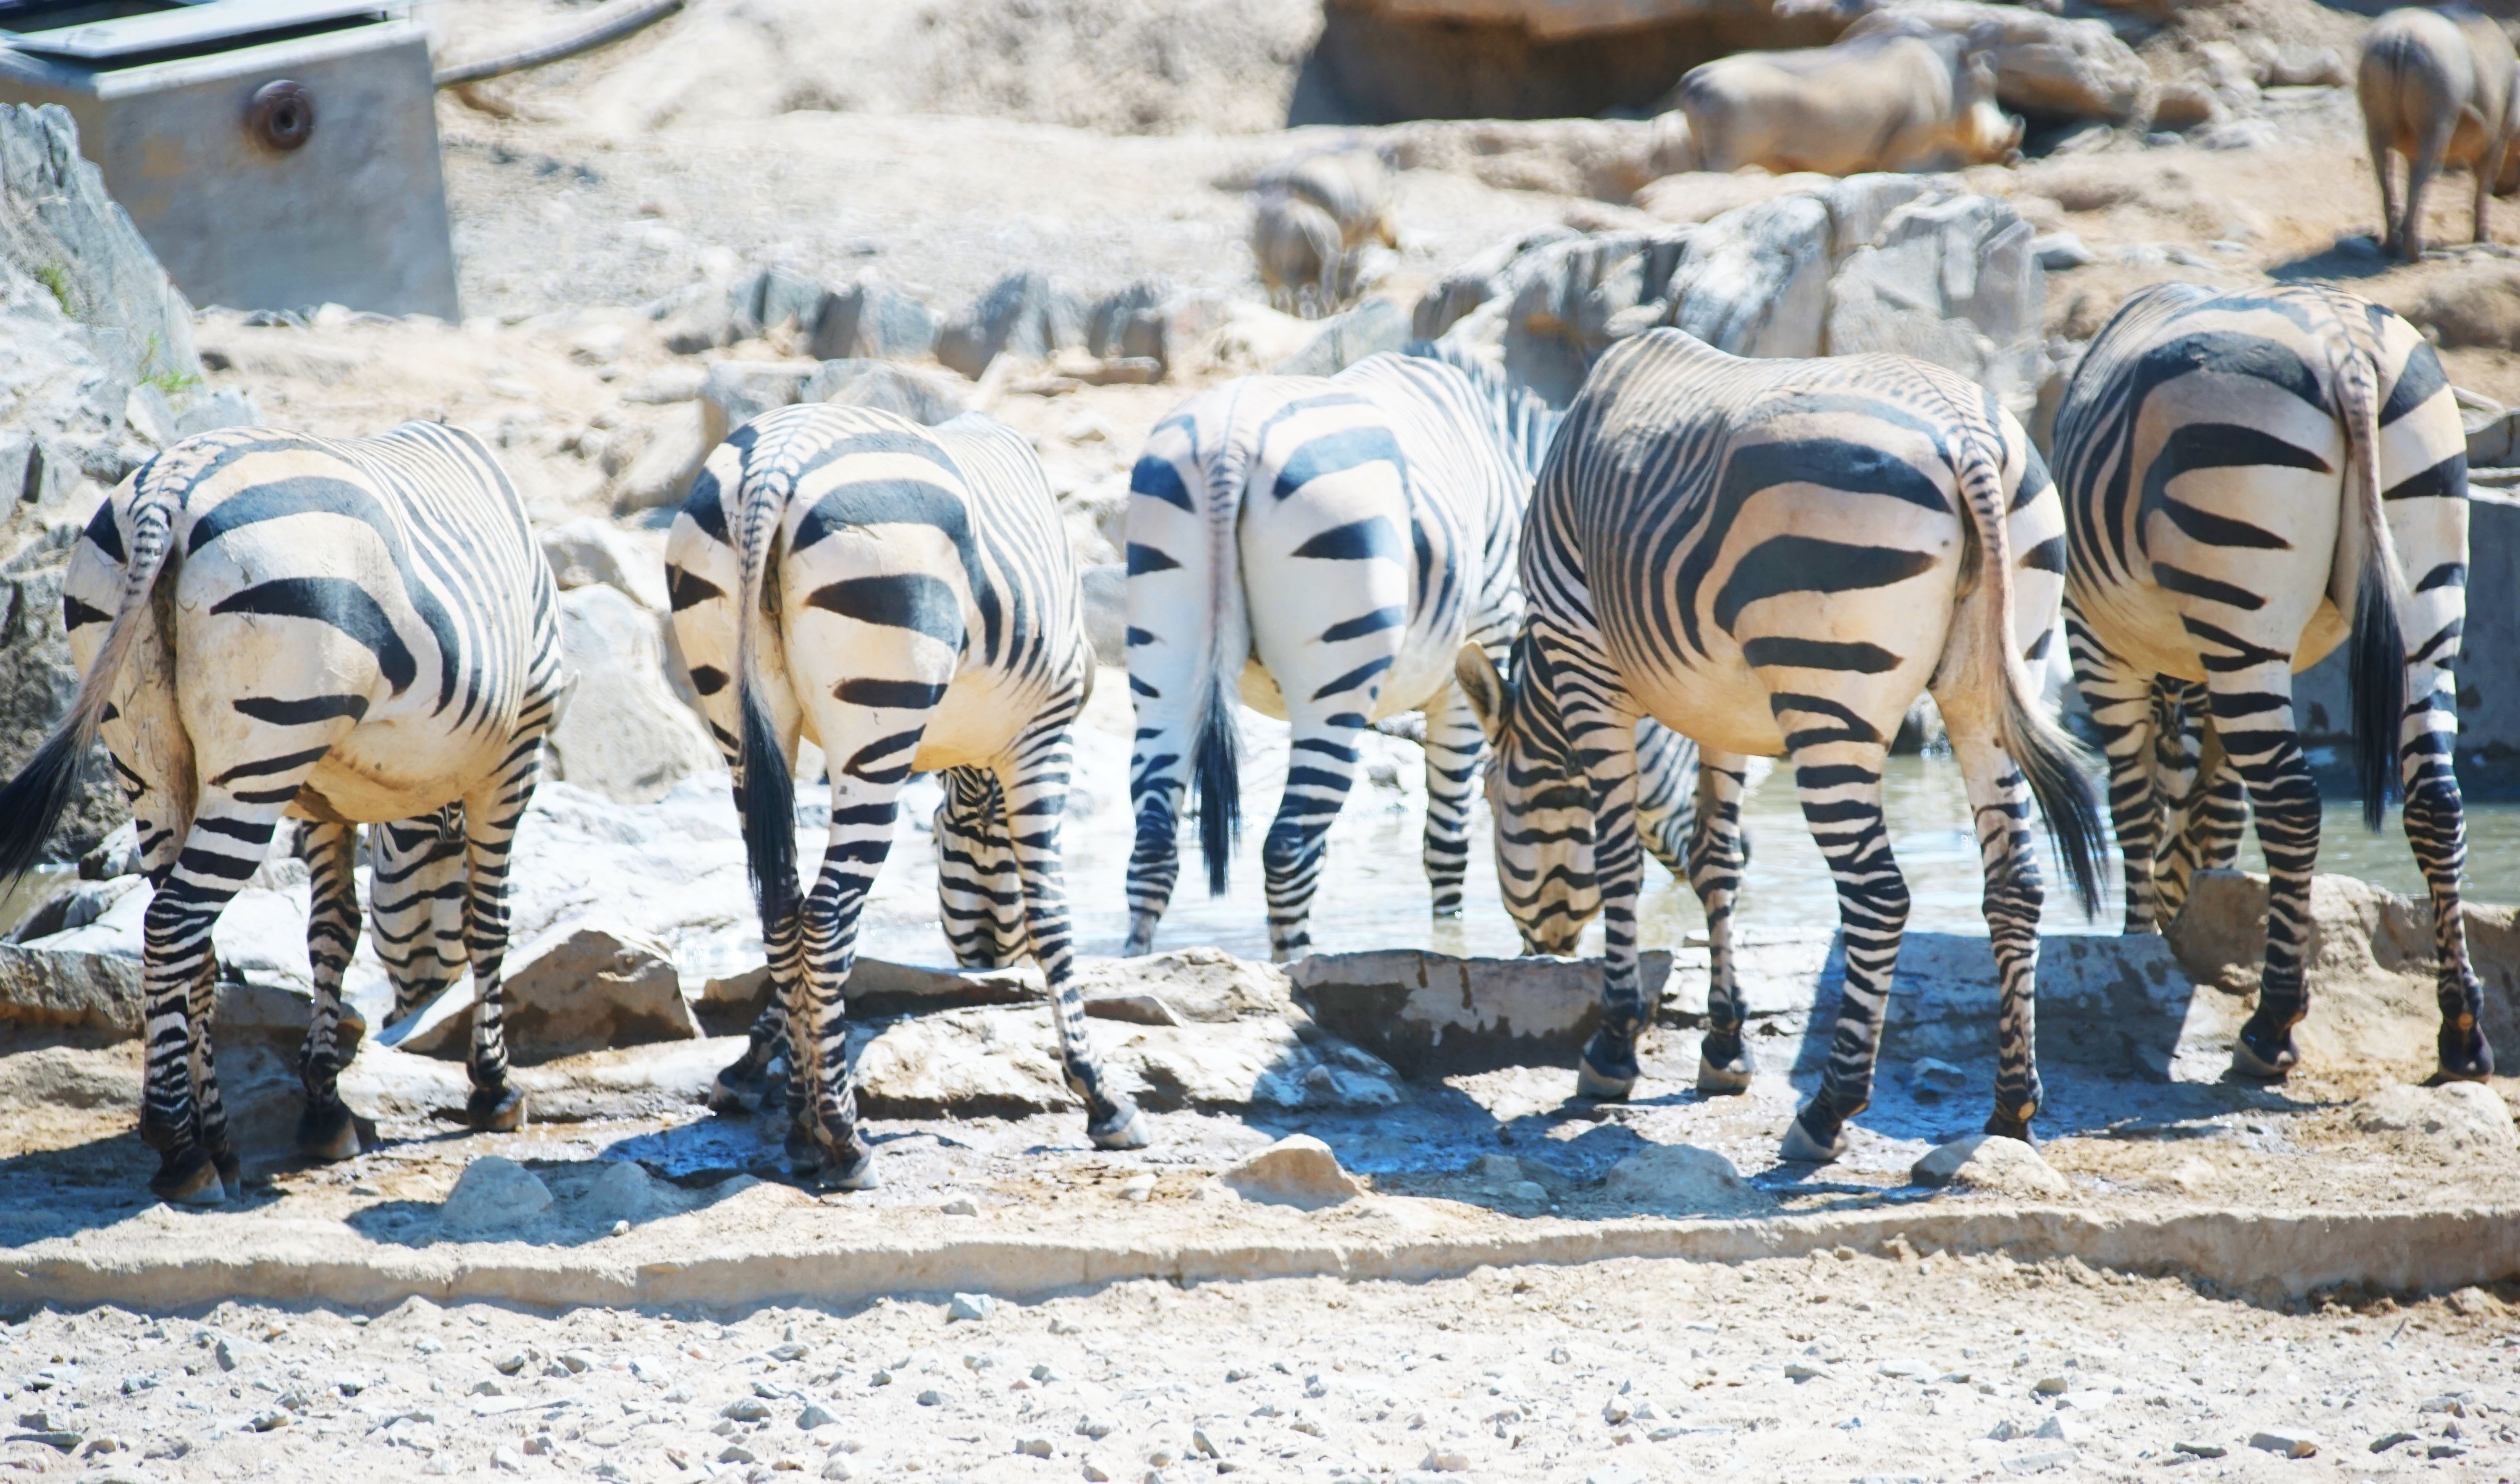 Mountain Zebras line up at the waterhole